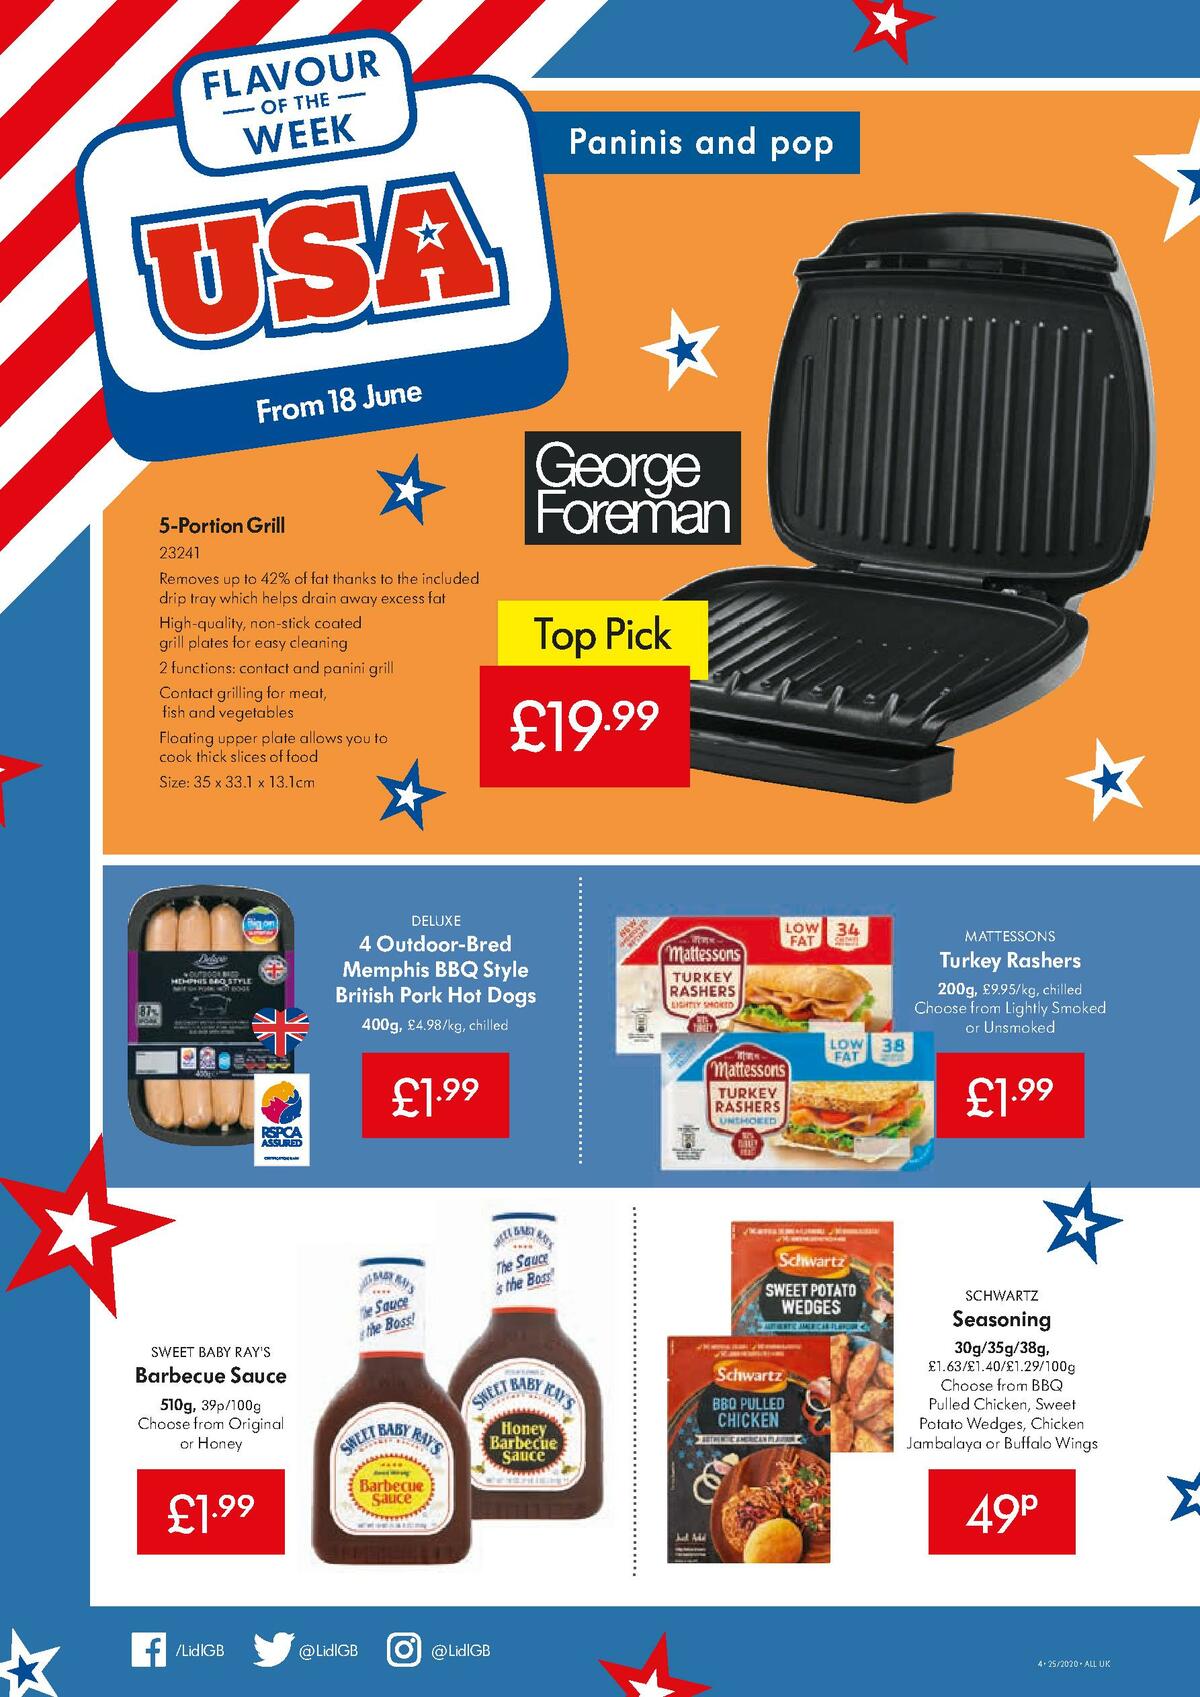 LIDL Offers from 18 June